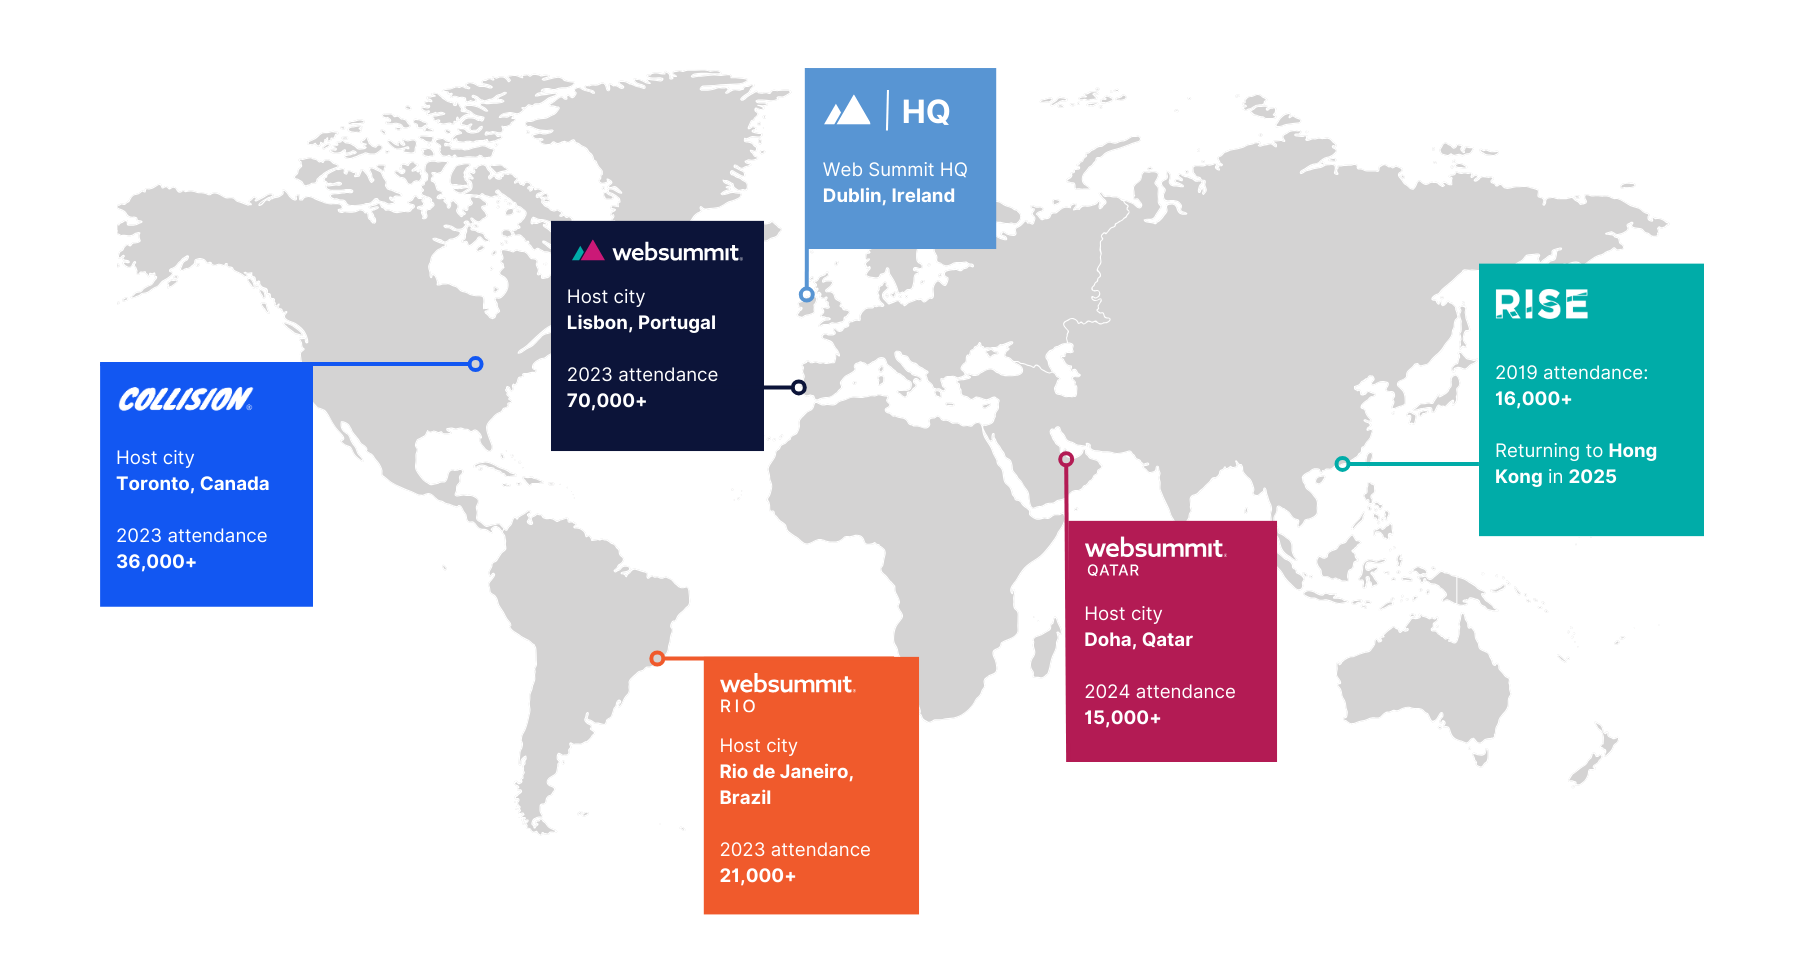 Map highlighting the locations of our main events: Web Summit in Lisbon, Web Summit Rio in Rio de Janeiro, Web Summit Qatar in Doha, Collision in Toronto and RISE in Hong Kong, and our head office in Dublin